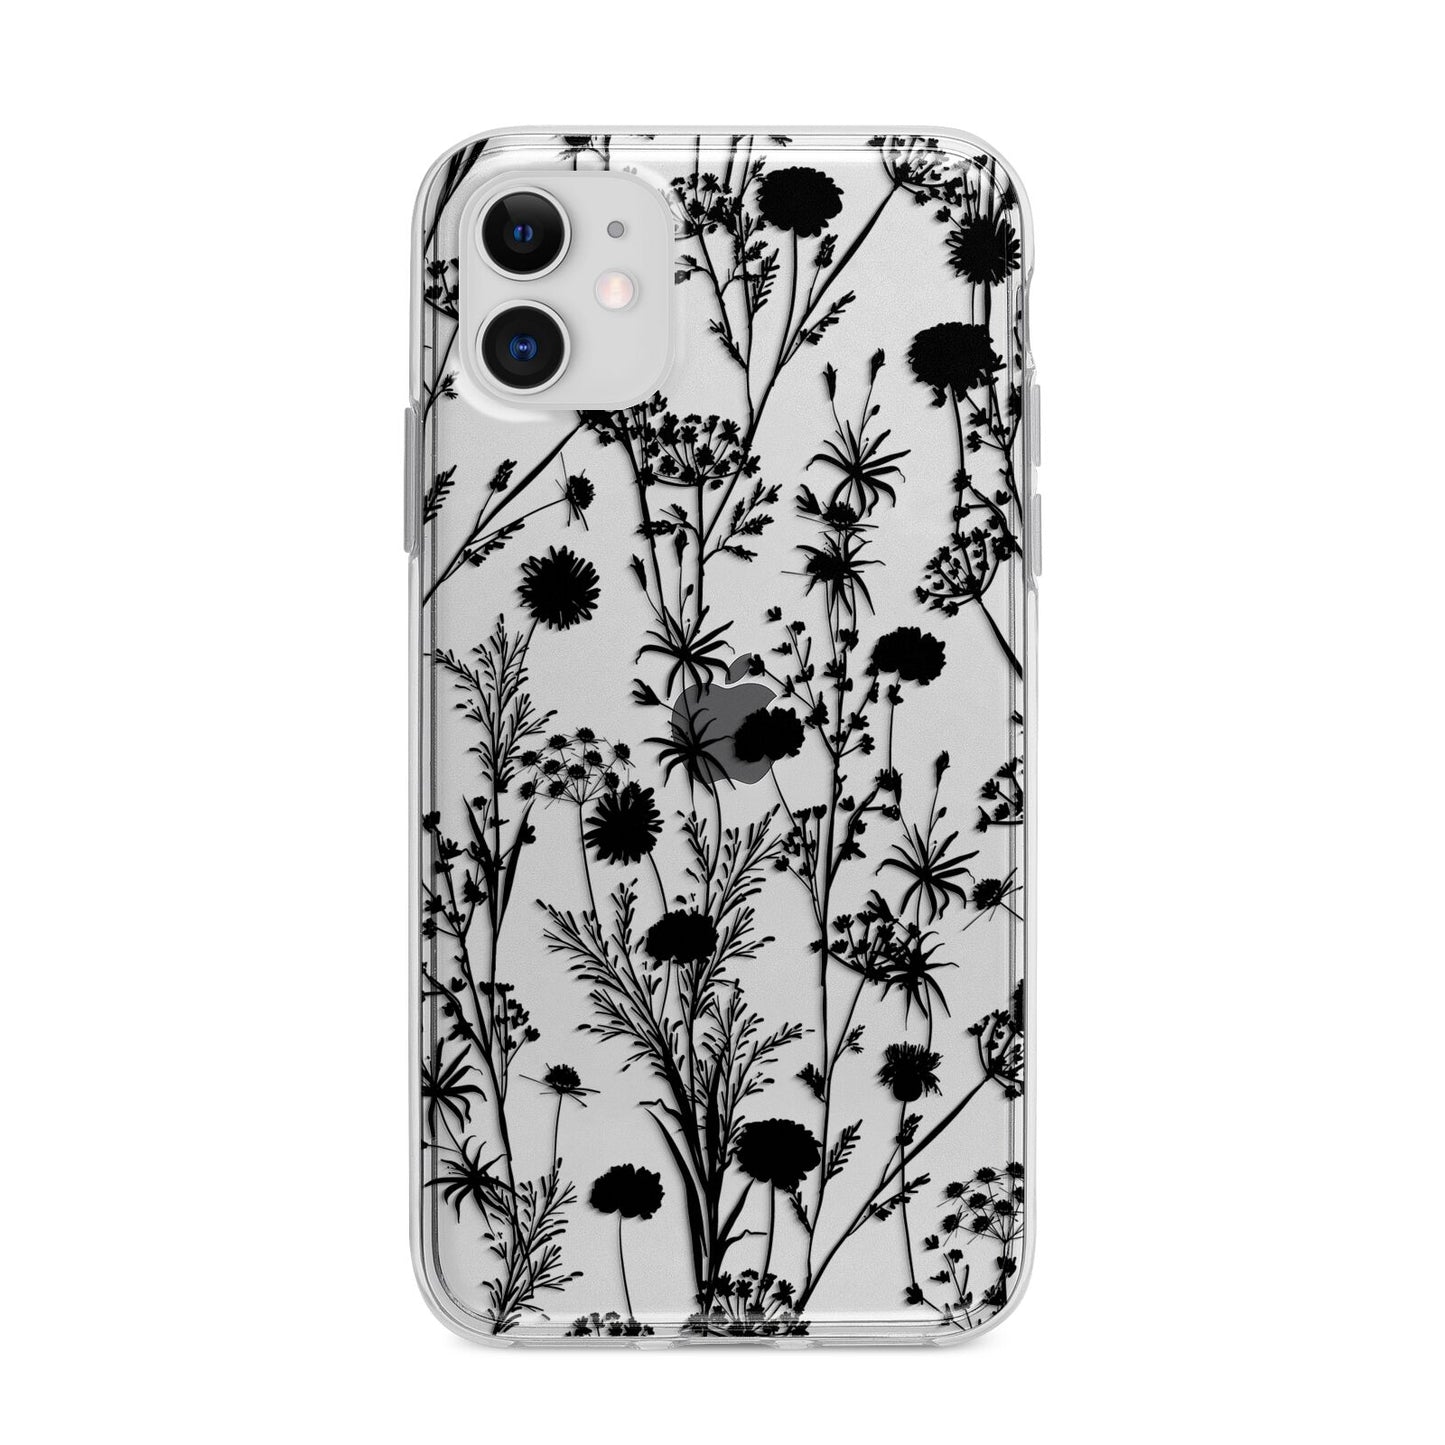 Black Floral Meadow Apple iPhone 11 in White with Bumper Case